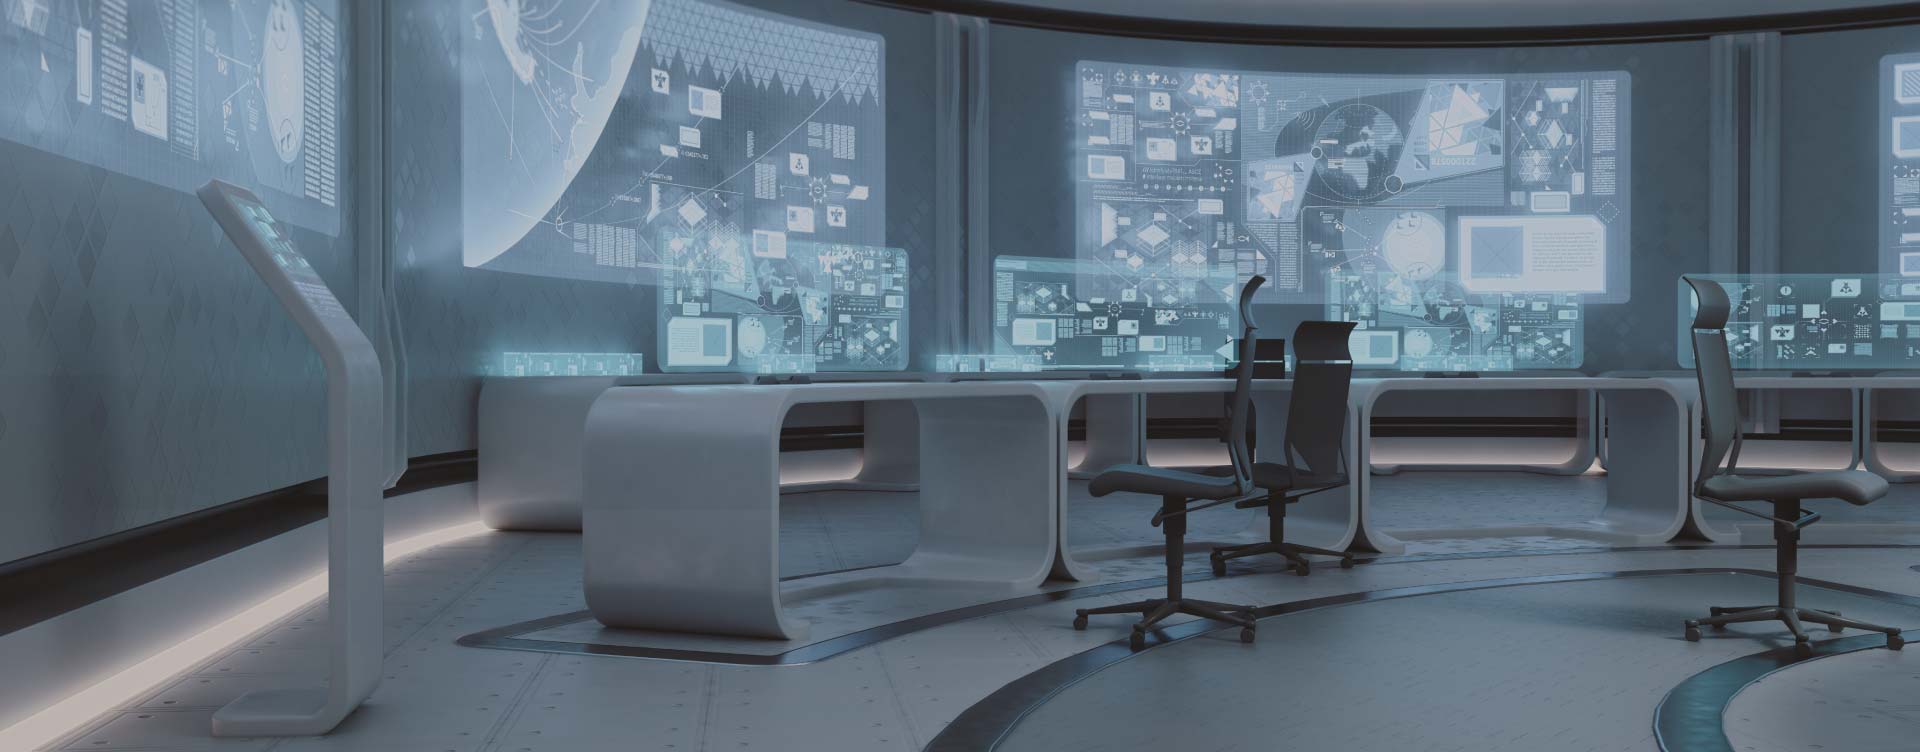 A futuristic control room with several white tables and black chairs in front of three large screens and control panels, operating with IHSE KVM solutions.